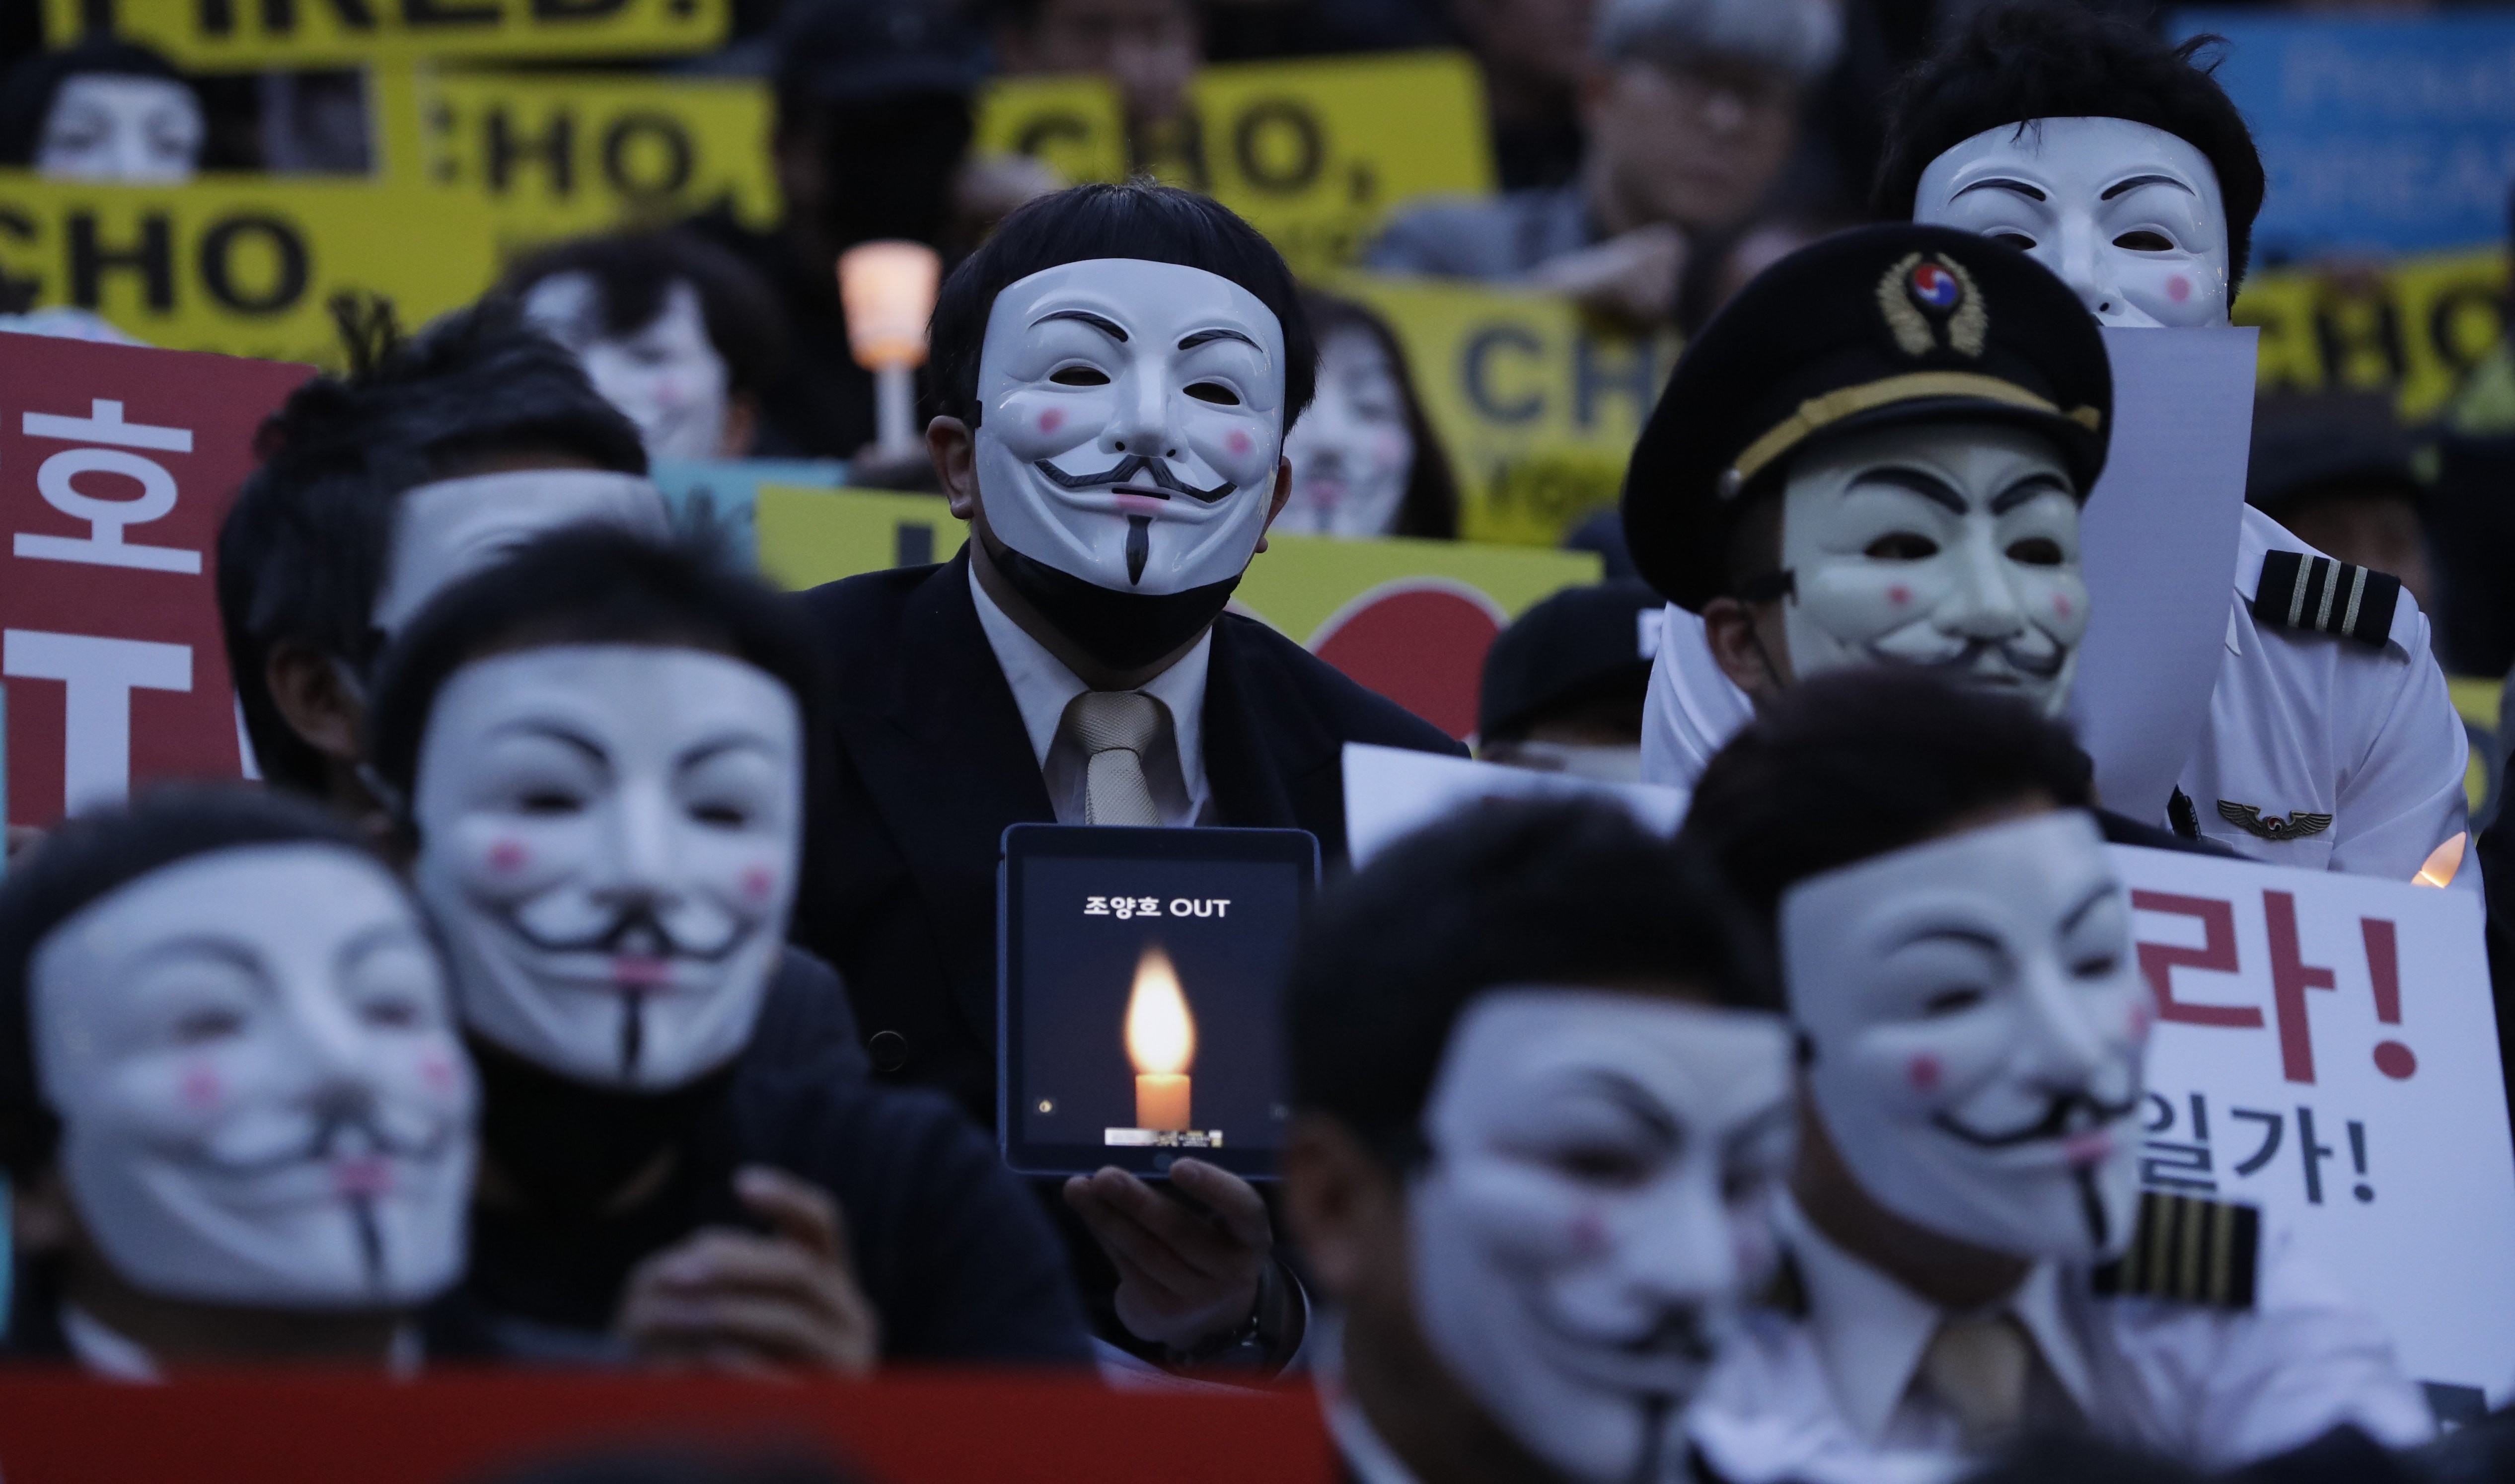 A Kakao Talk chat room set up by tax authorities for people to rat on the owners of Korean Air has become a platform against injustice at the core of society